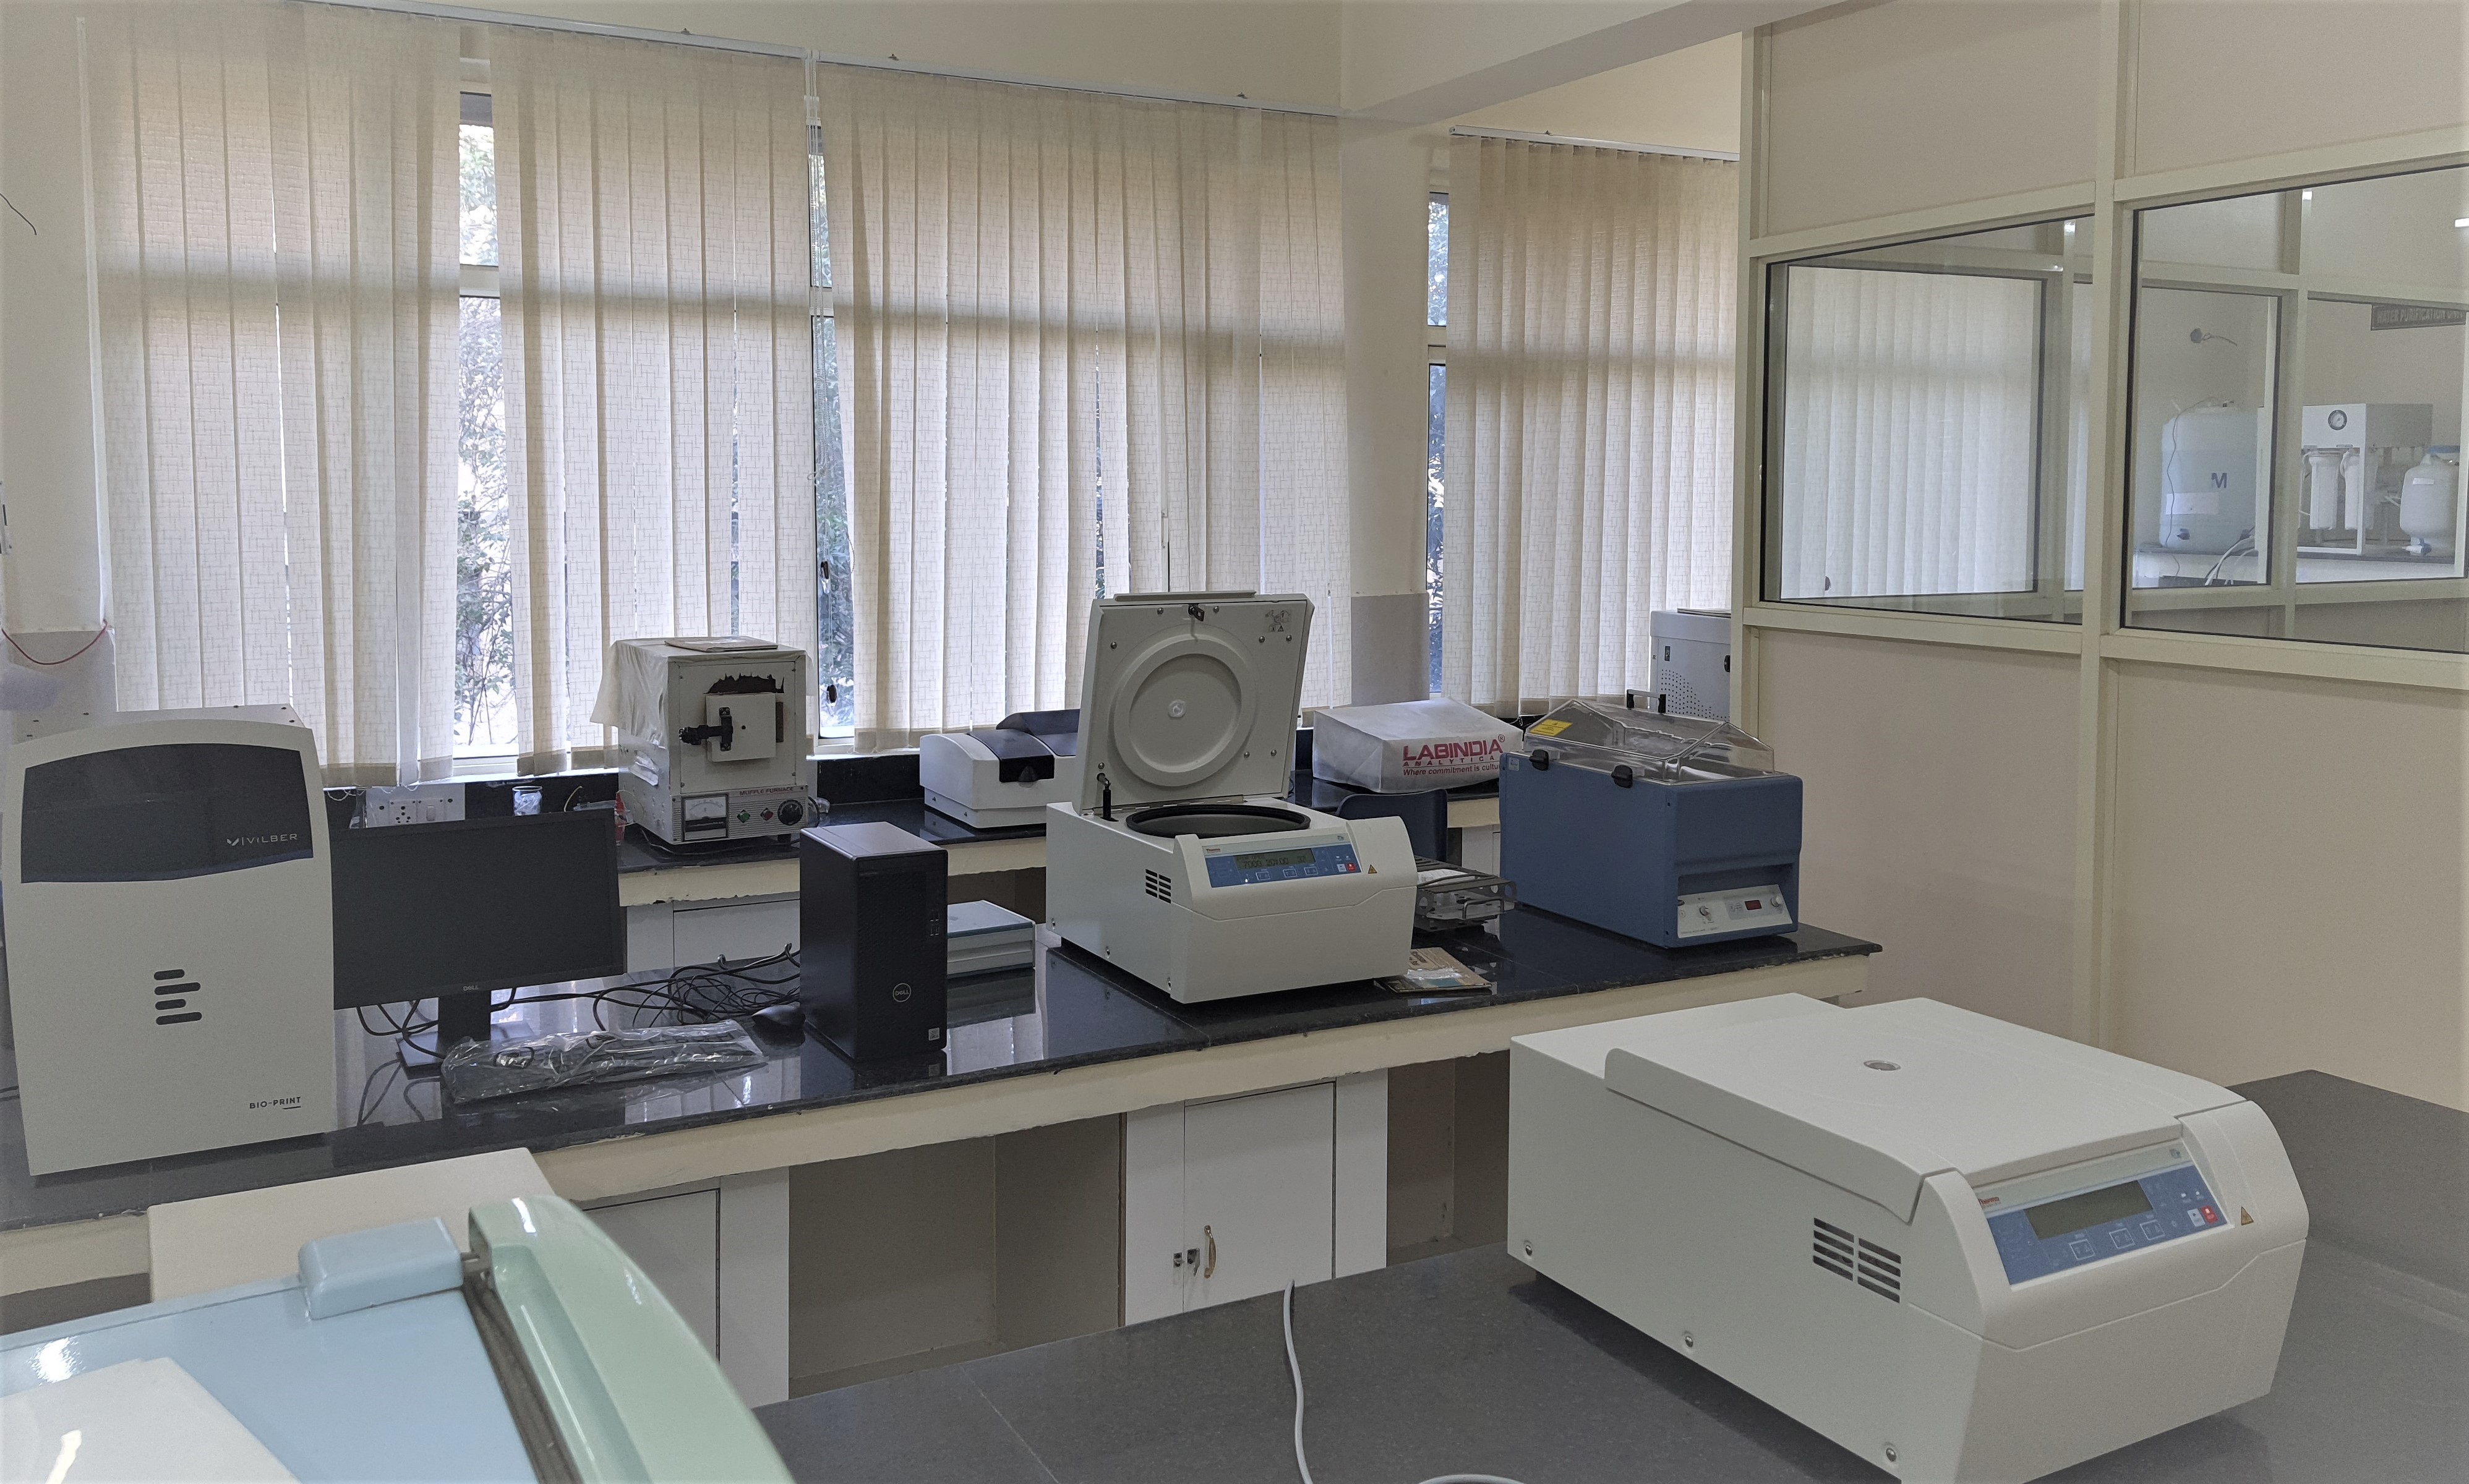 Central Facility Lab, Department of Zoology